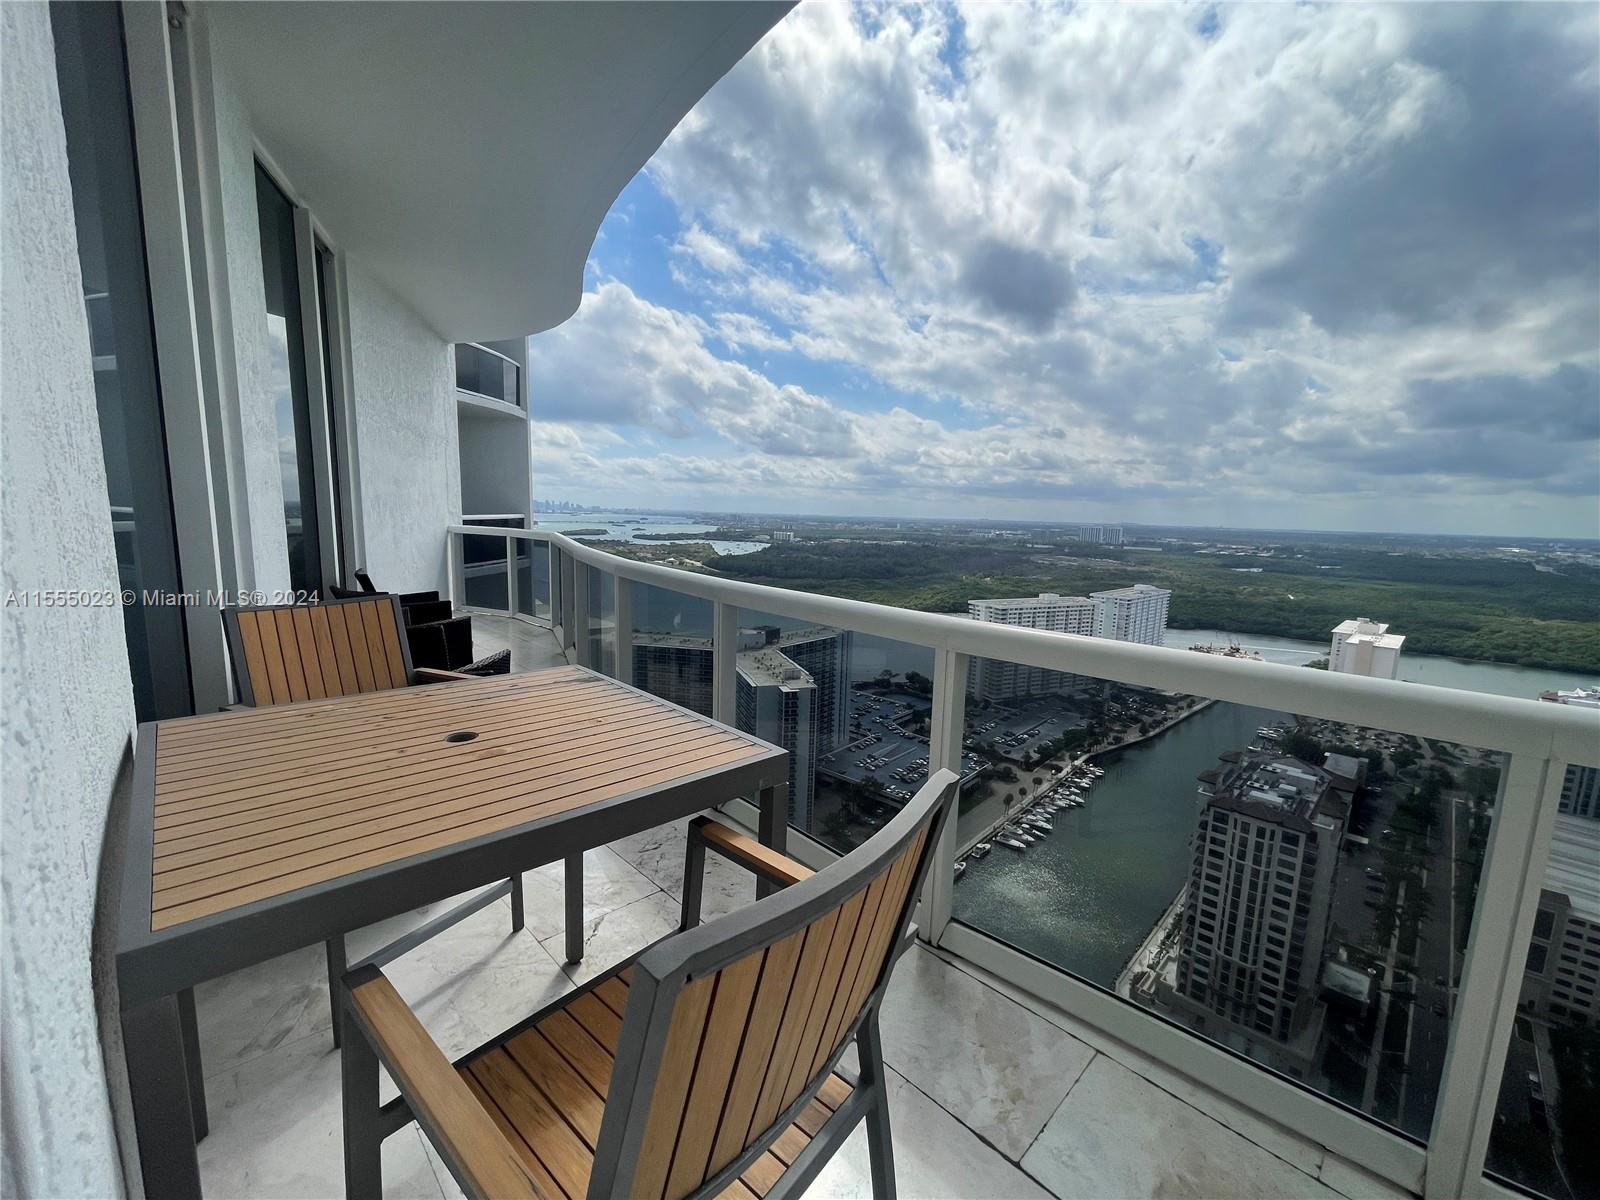 15901 Collins Ave 3505, Sunny Isles Beach, Florida 33160, 2 Bedrooms Bedrooms, ,2 BathroomsBathrooms,Residentiallease,For Rent,15901 Collins Ave 3505,A11555023